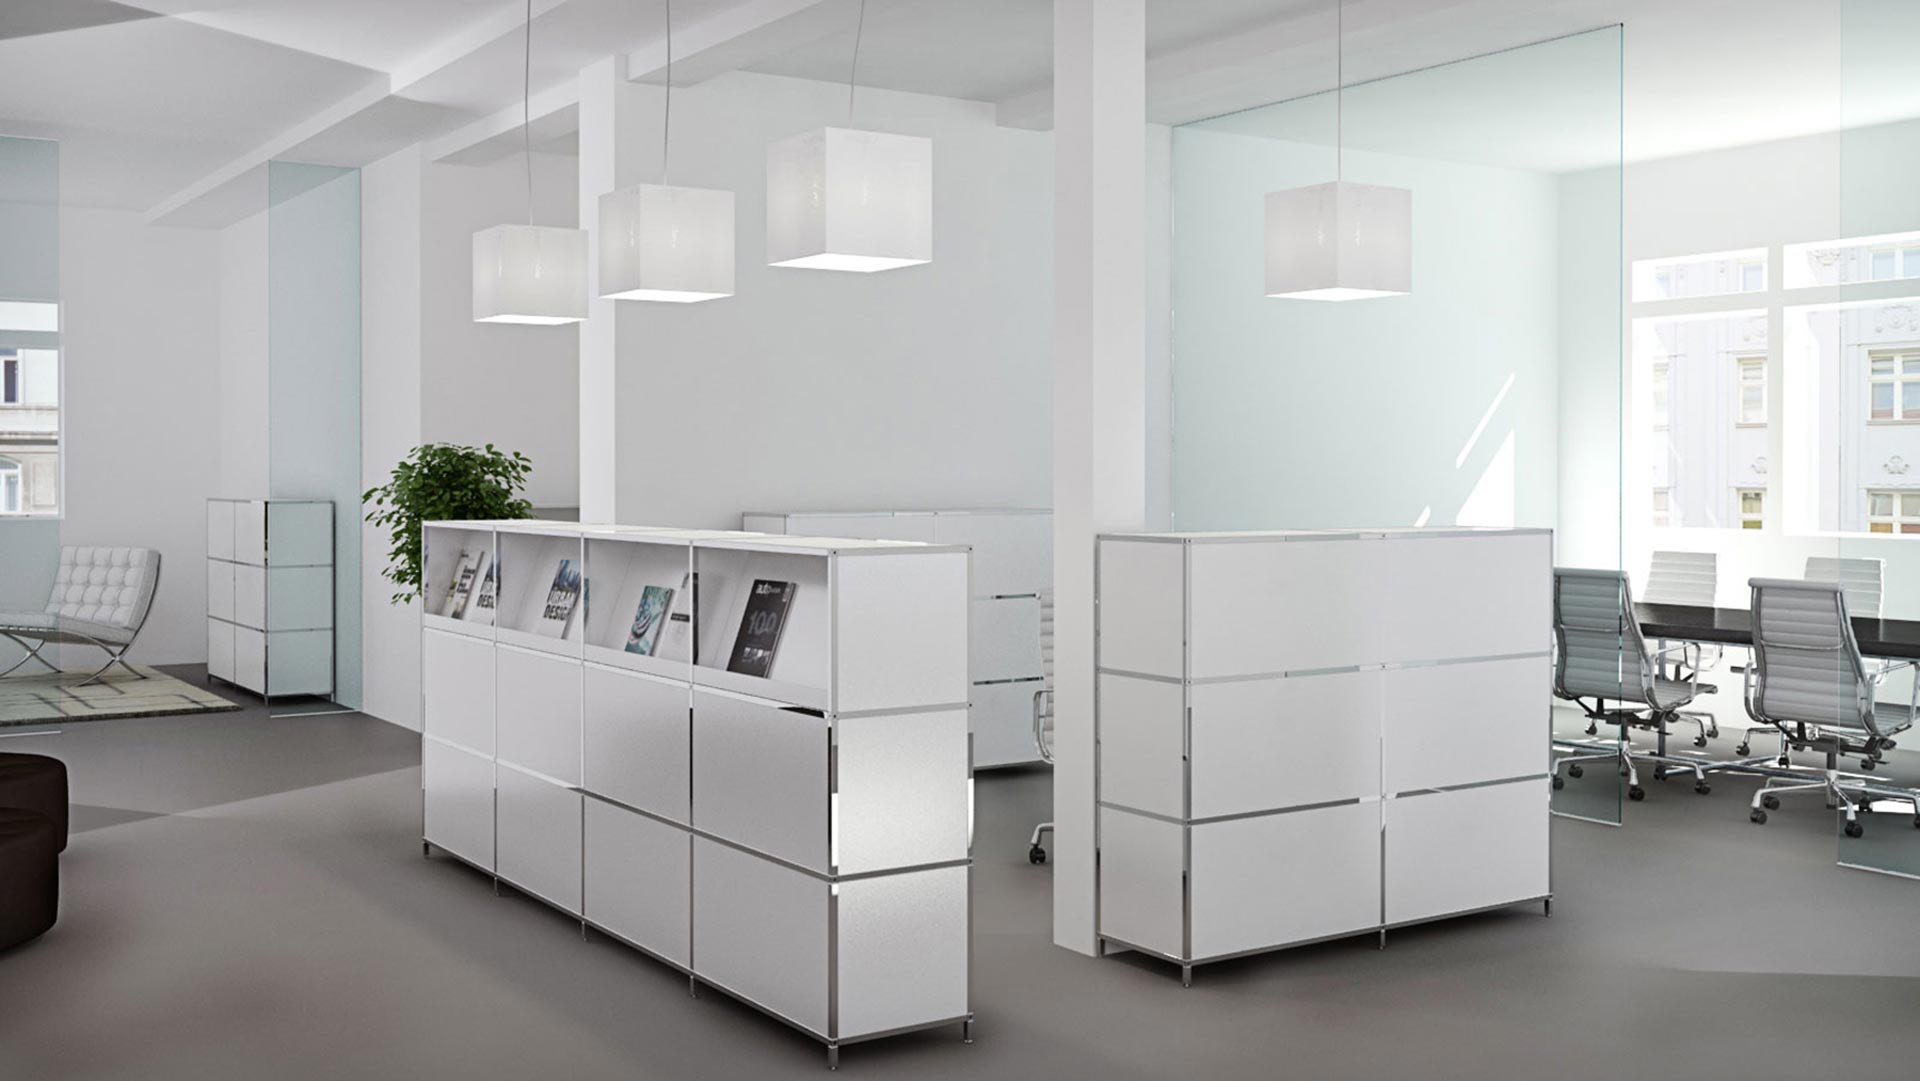 Modular furniture system minicubo for offices, meeting rooms and counters. Swiss Made.